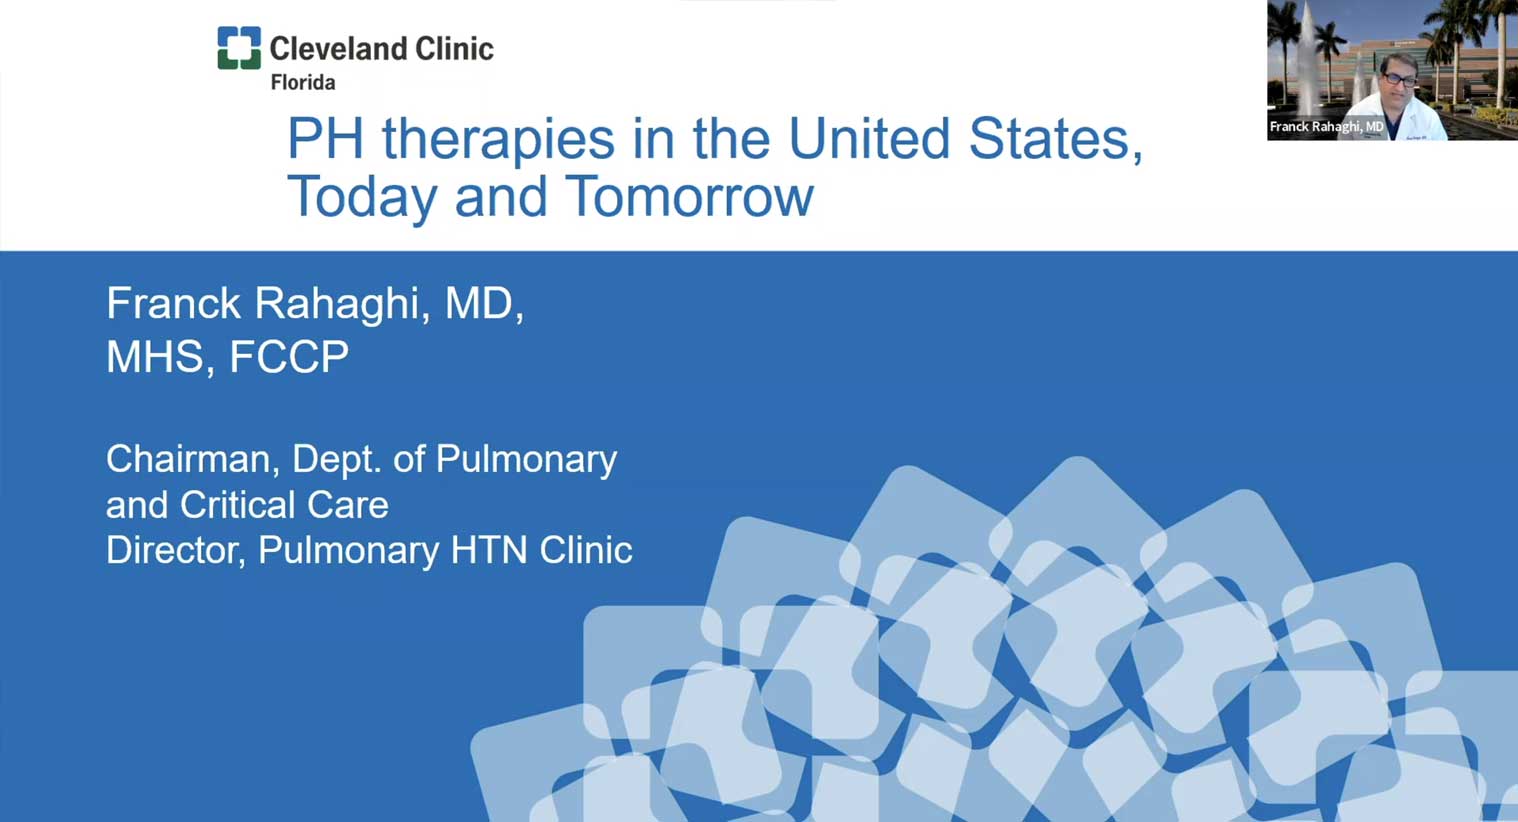 Cleveland Clinic - PH therapies in the US, Today and Tomorrow